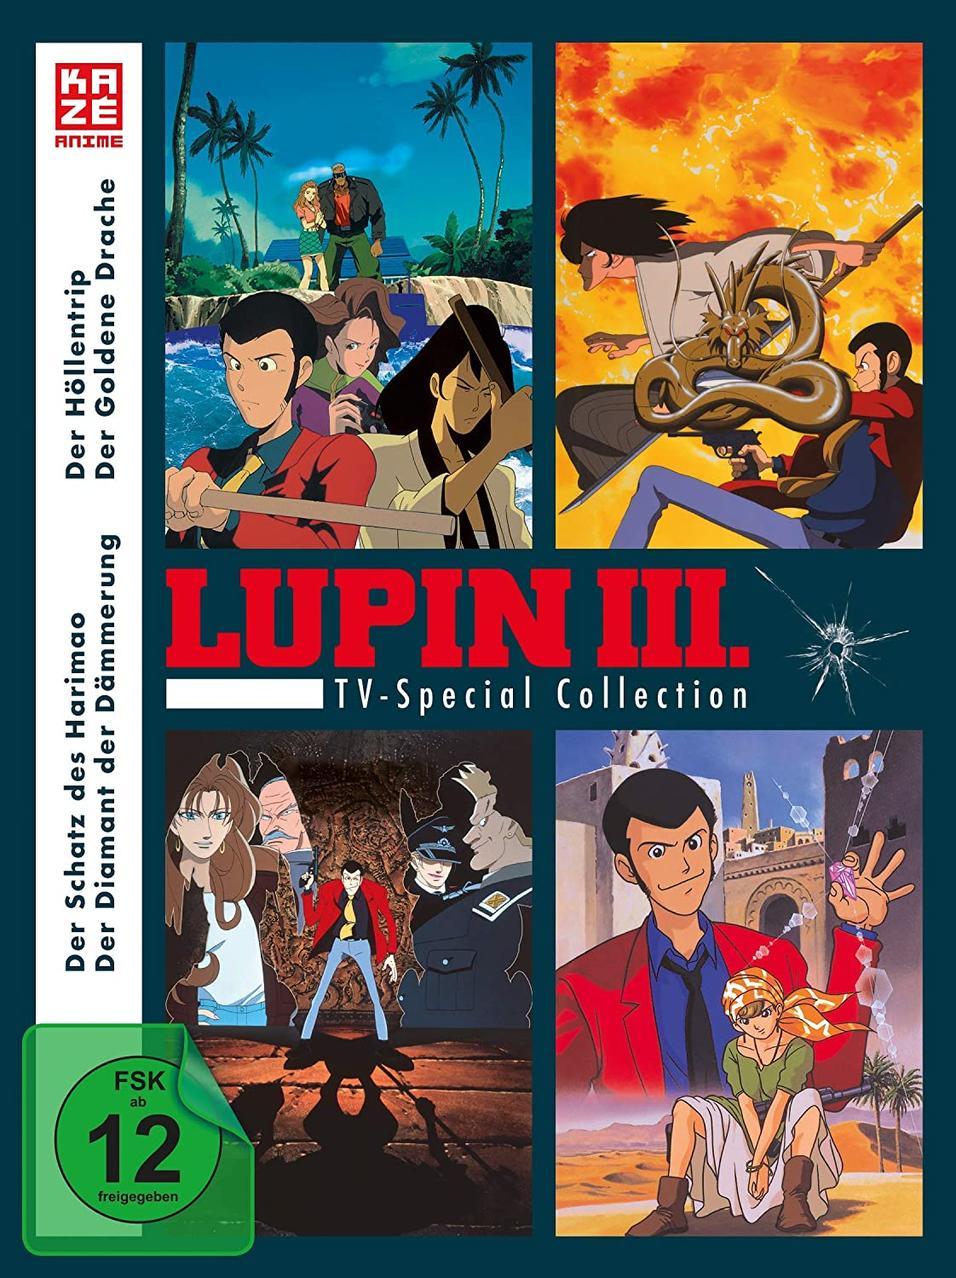 LUPIN THE TV-SPECIALS - THIRD DVD